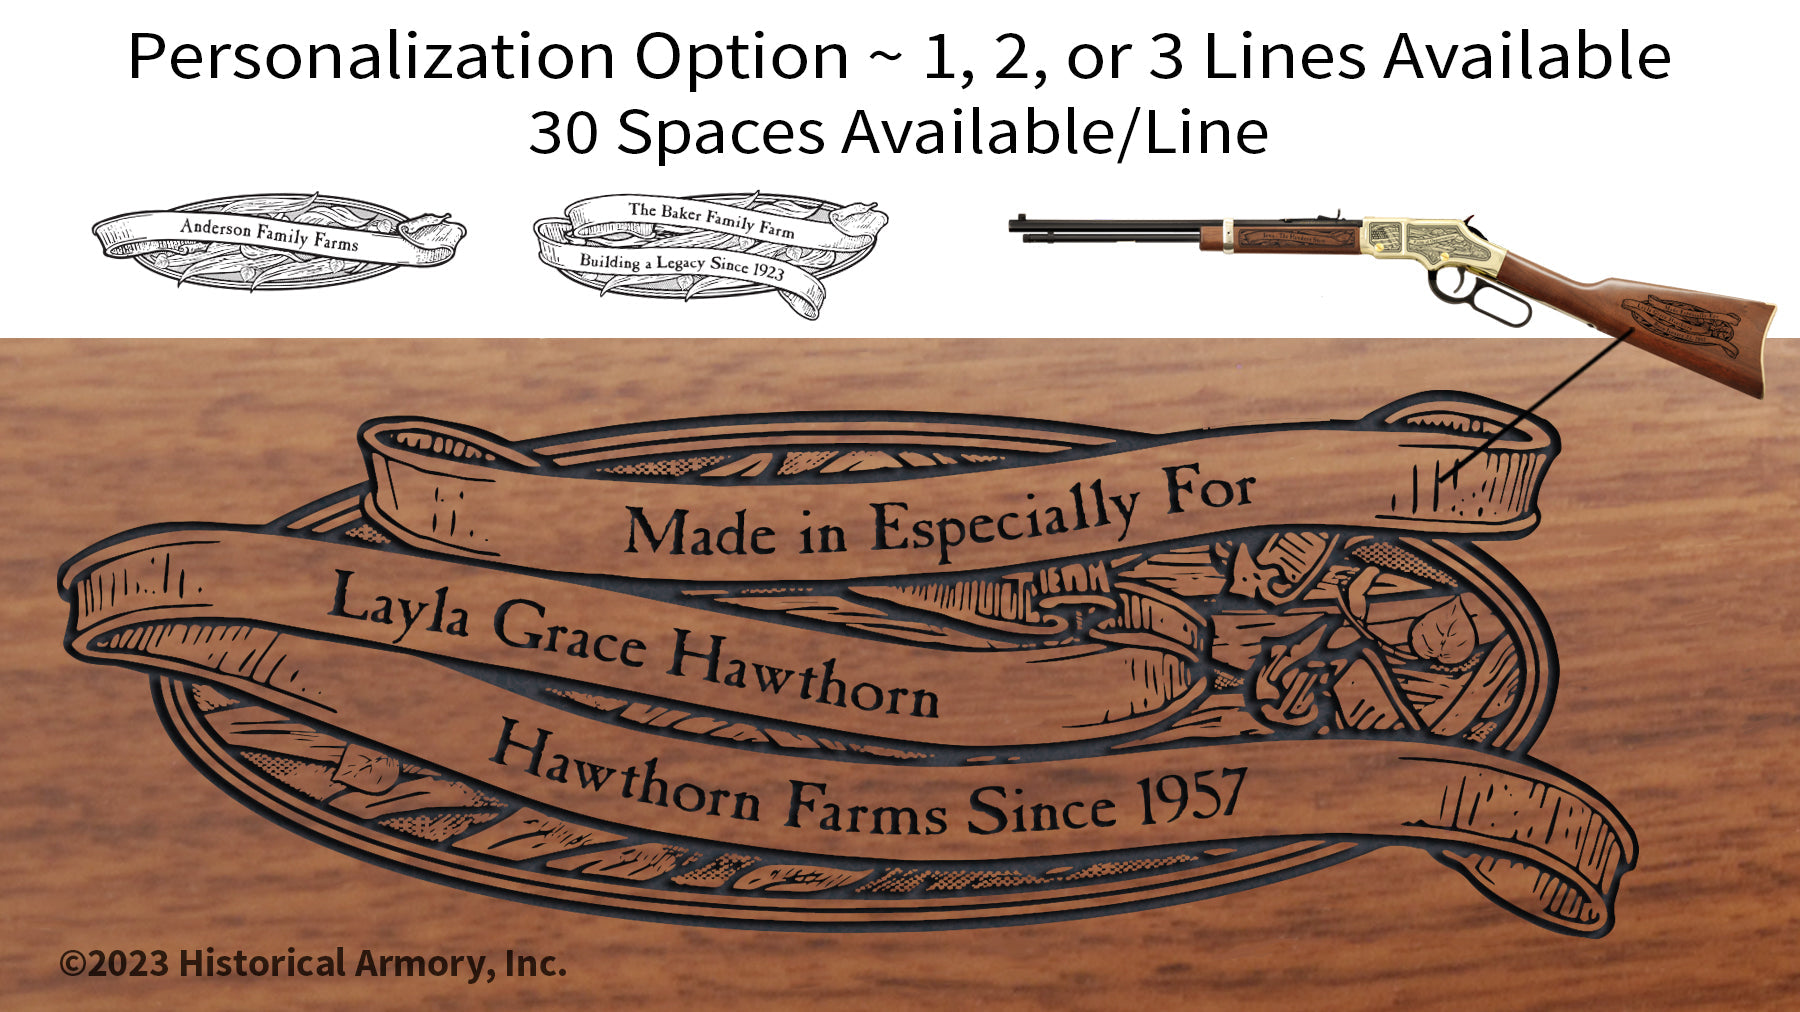 Oklahoma Agricultural Heritage Engraved Rifle Personalization